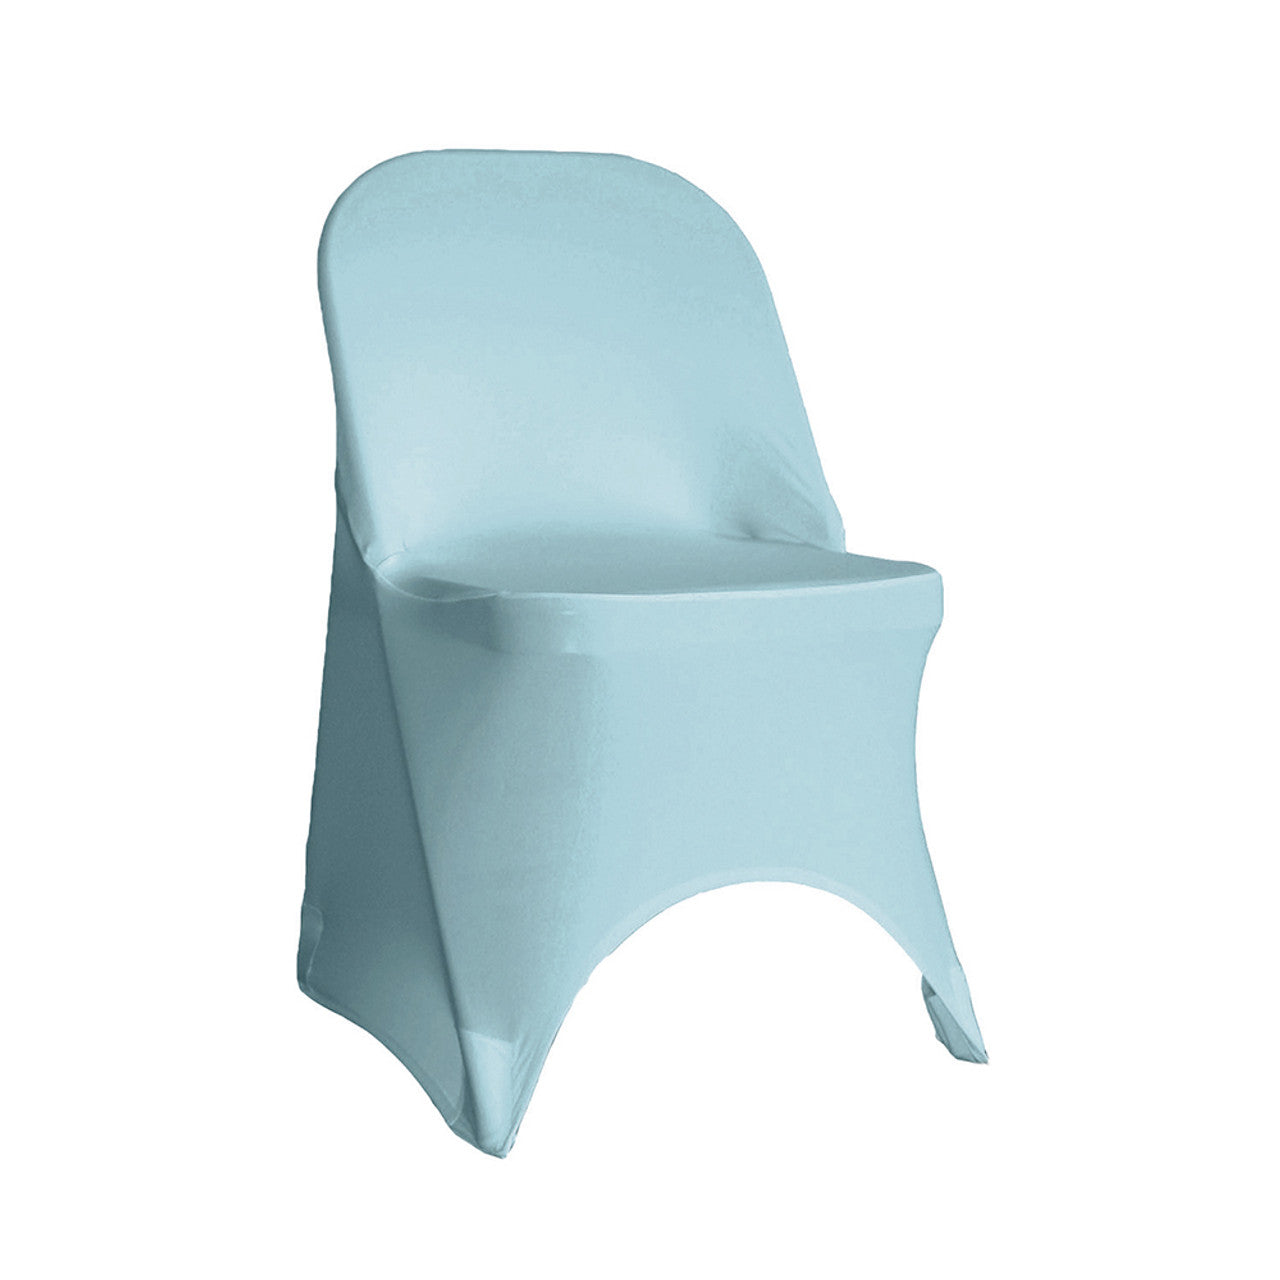 Spandex Folding Chair Cover in Dusty Blue – Urquid Linen